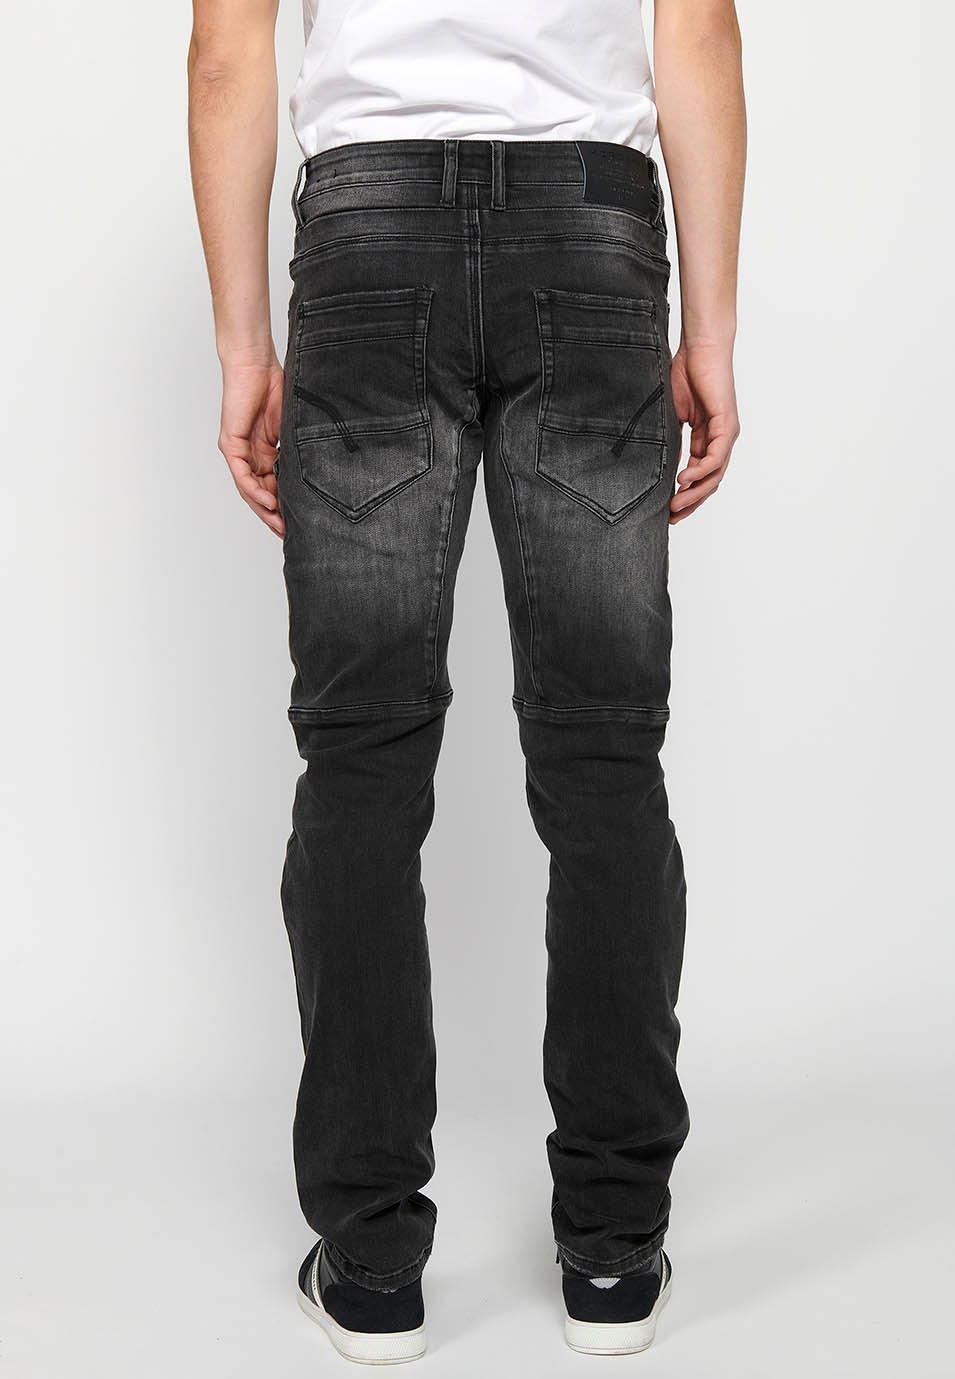 Long denim pants with front closure with zipper and button and pockets, two sides in Black for Men 5